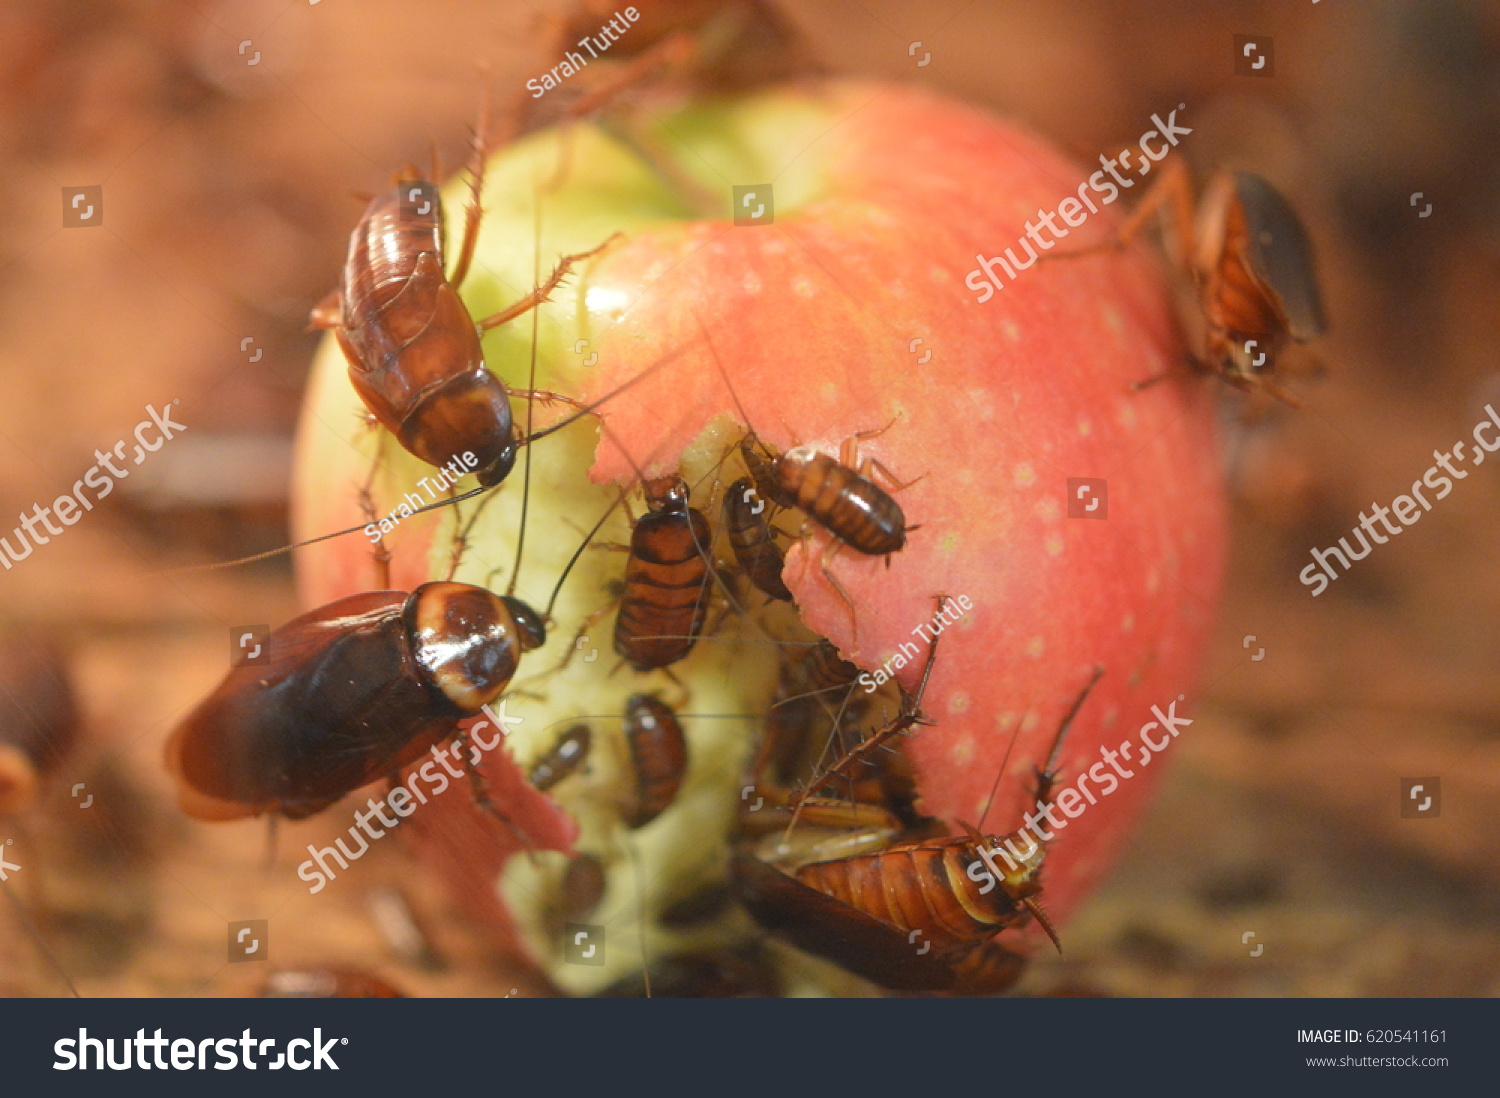 Cockroaches Eating an Apple #620541161